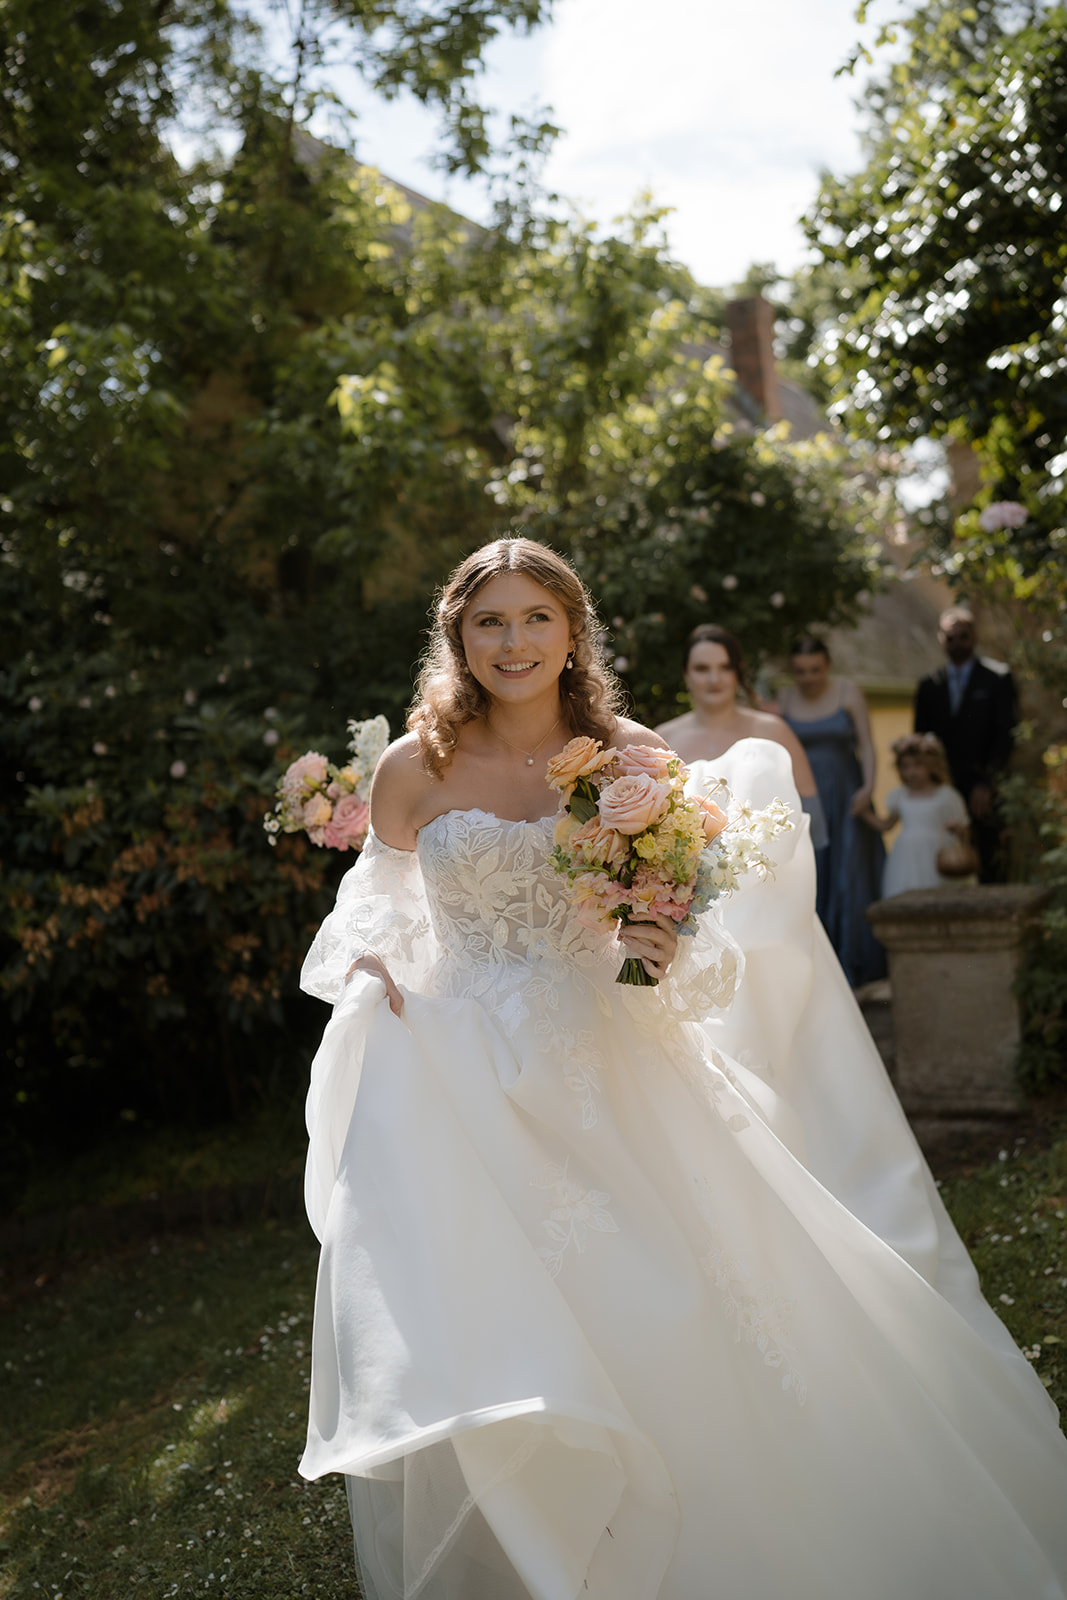 Montsalvat's iconic backdrop frames a bride's walk to her wedding ceremony.